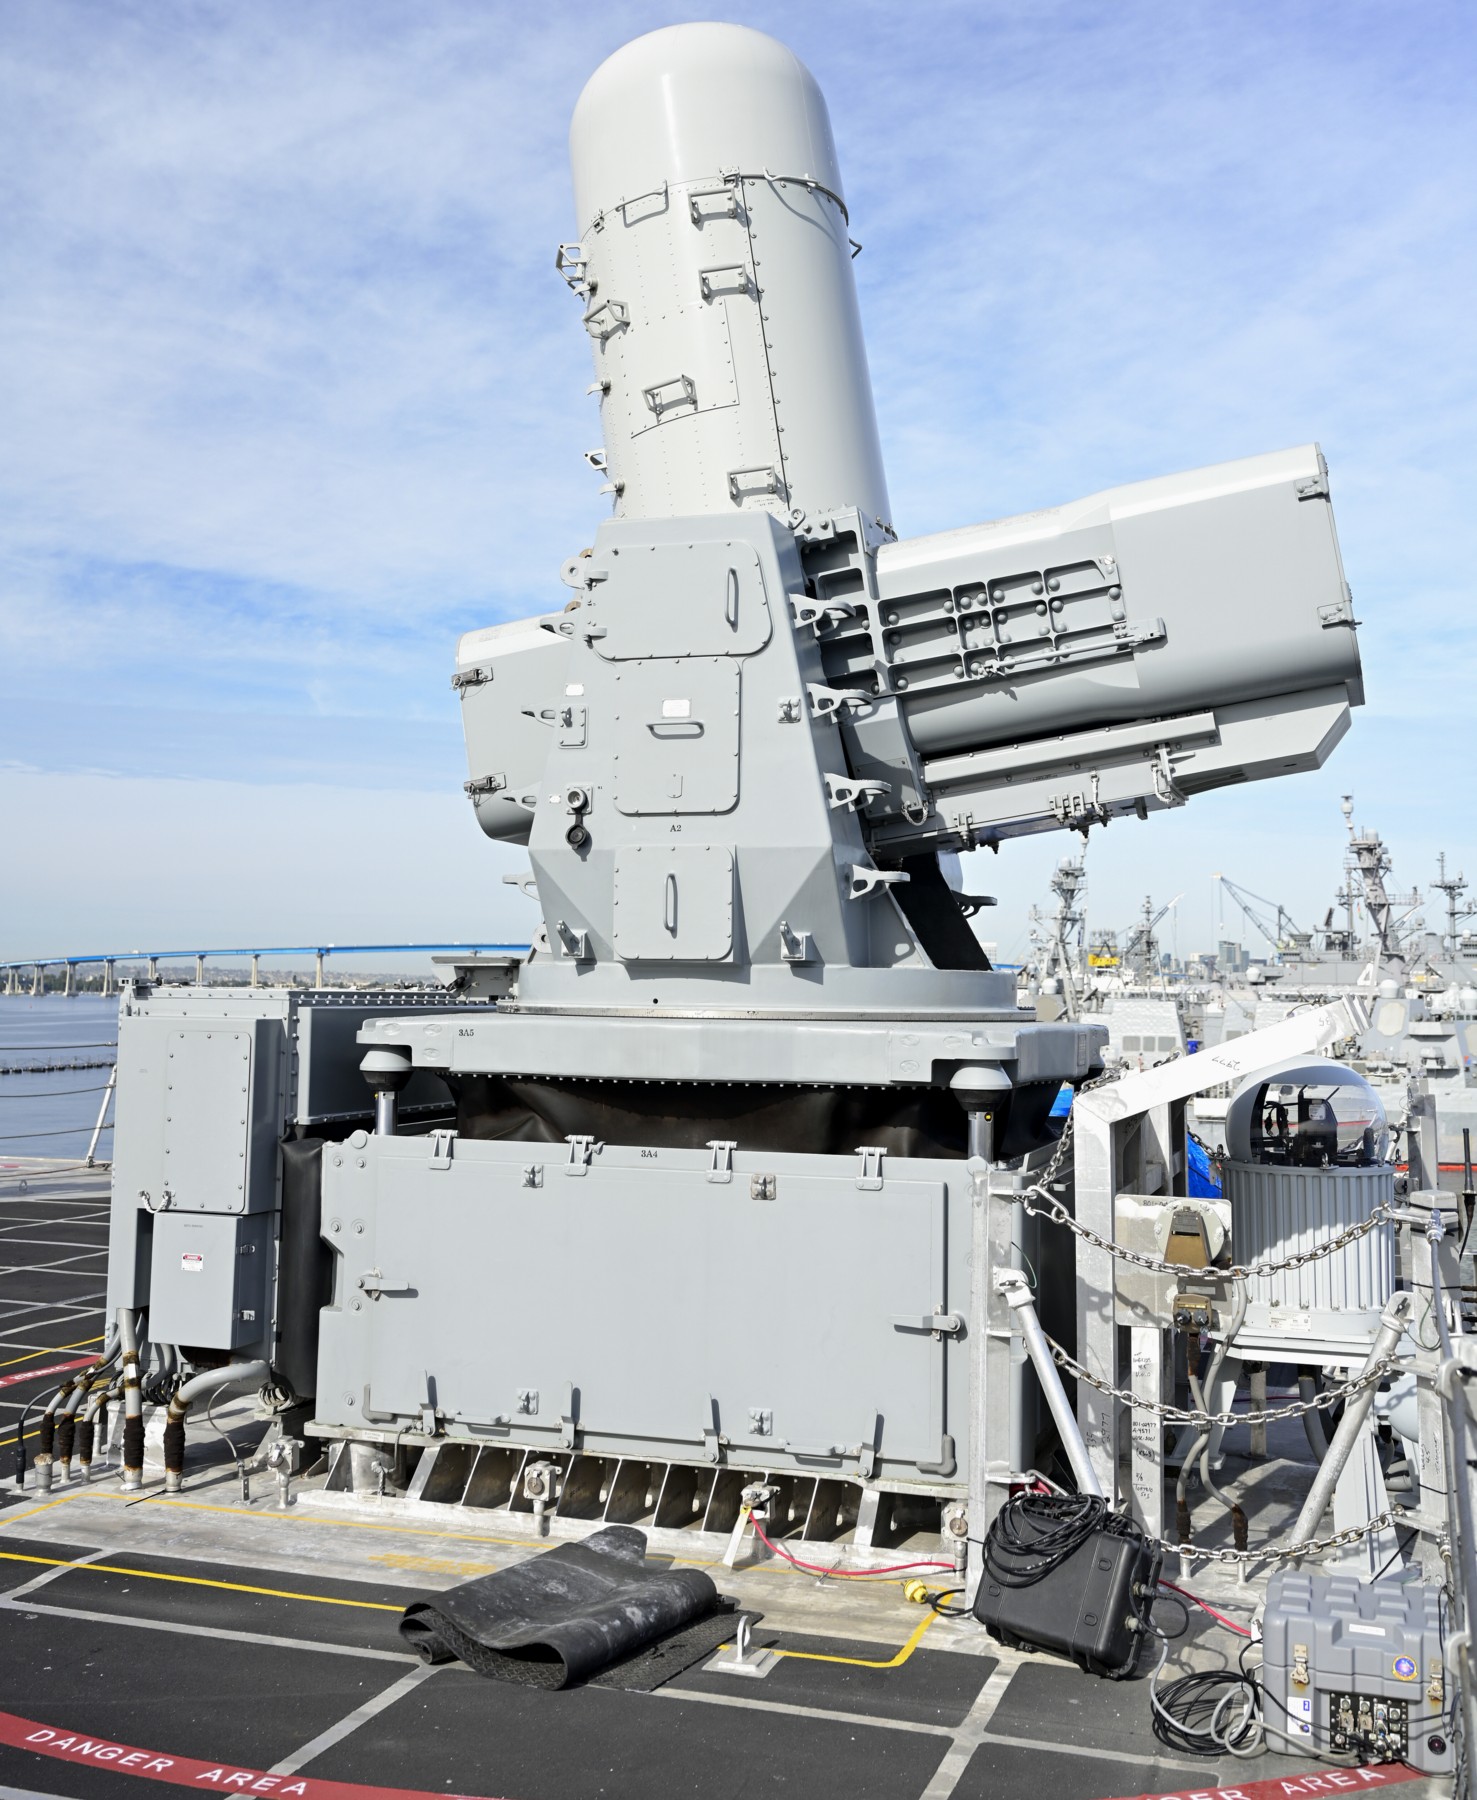 lcs-30 uss canberra littoral combat ship independence class us navy mk.15 mod.31 searam close-in weapon system ciws 13